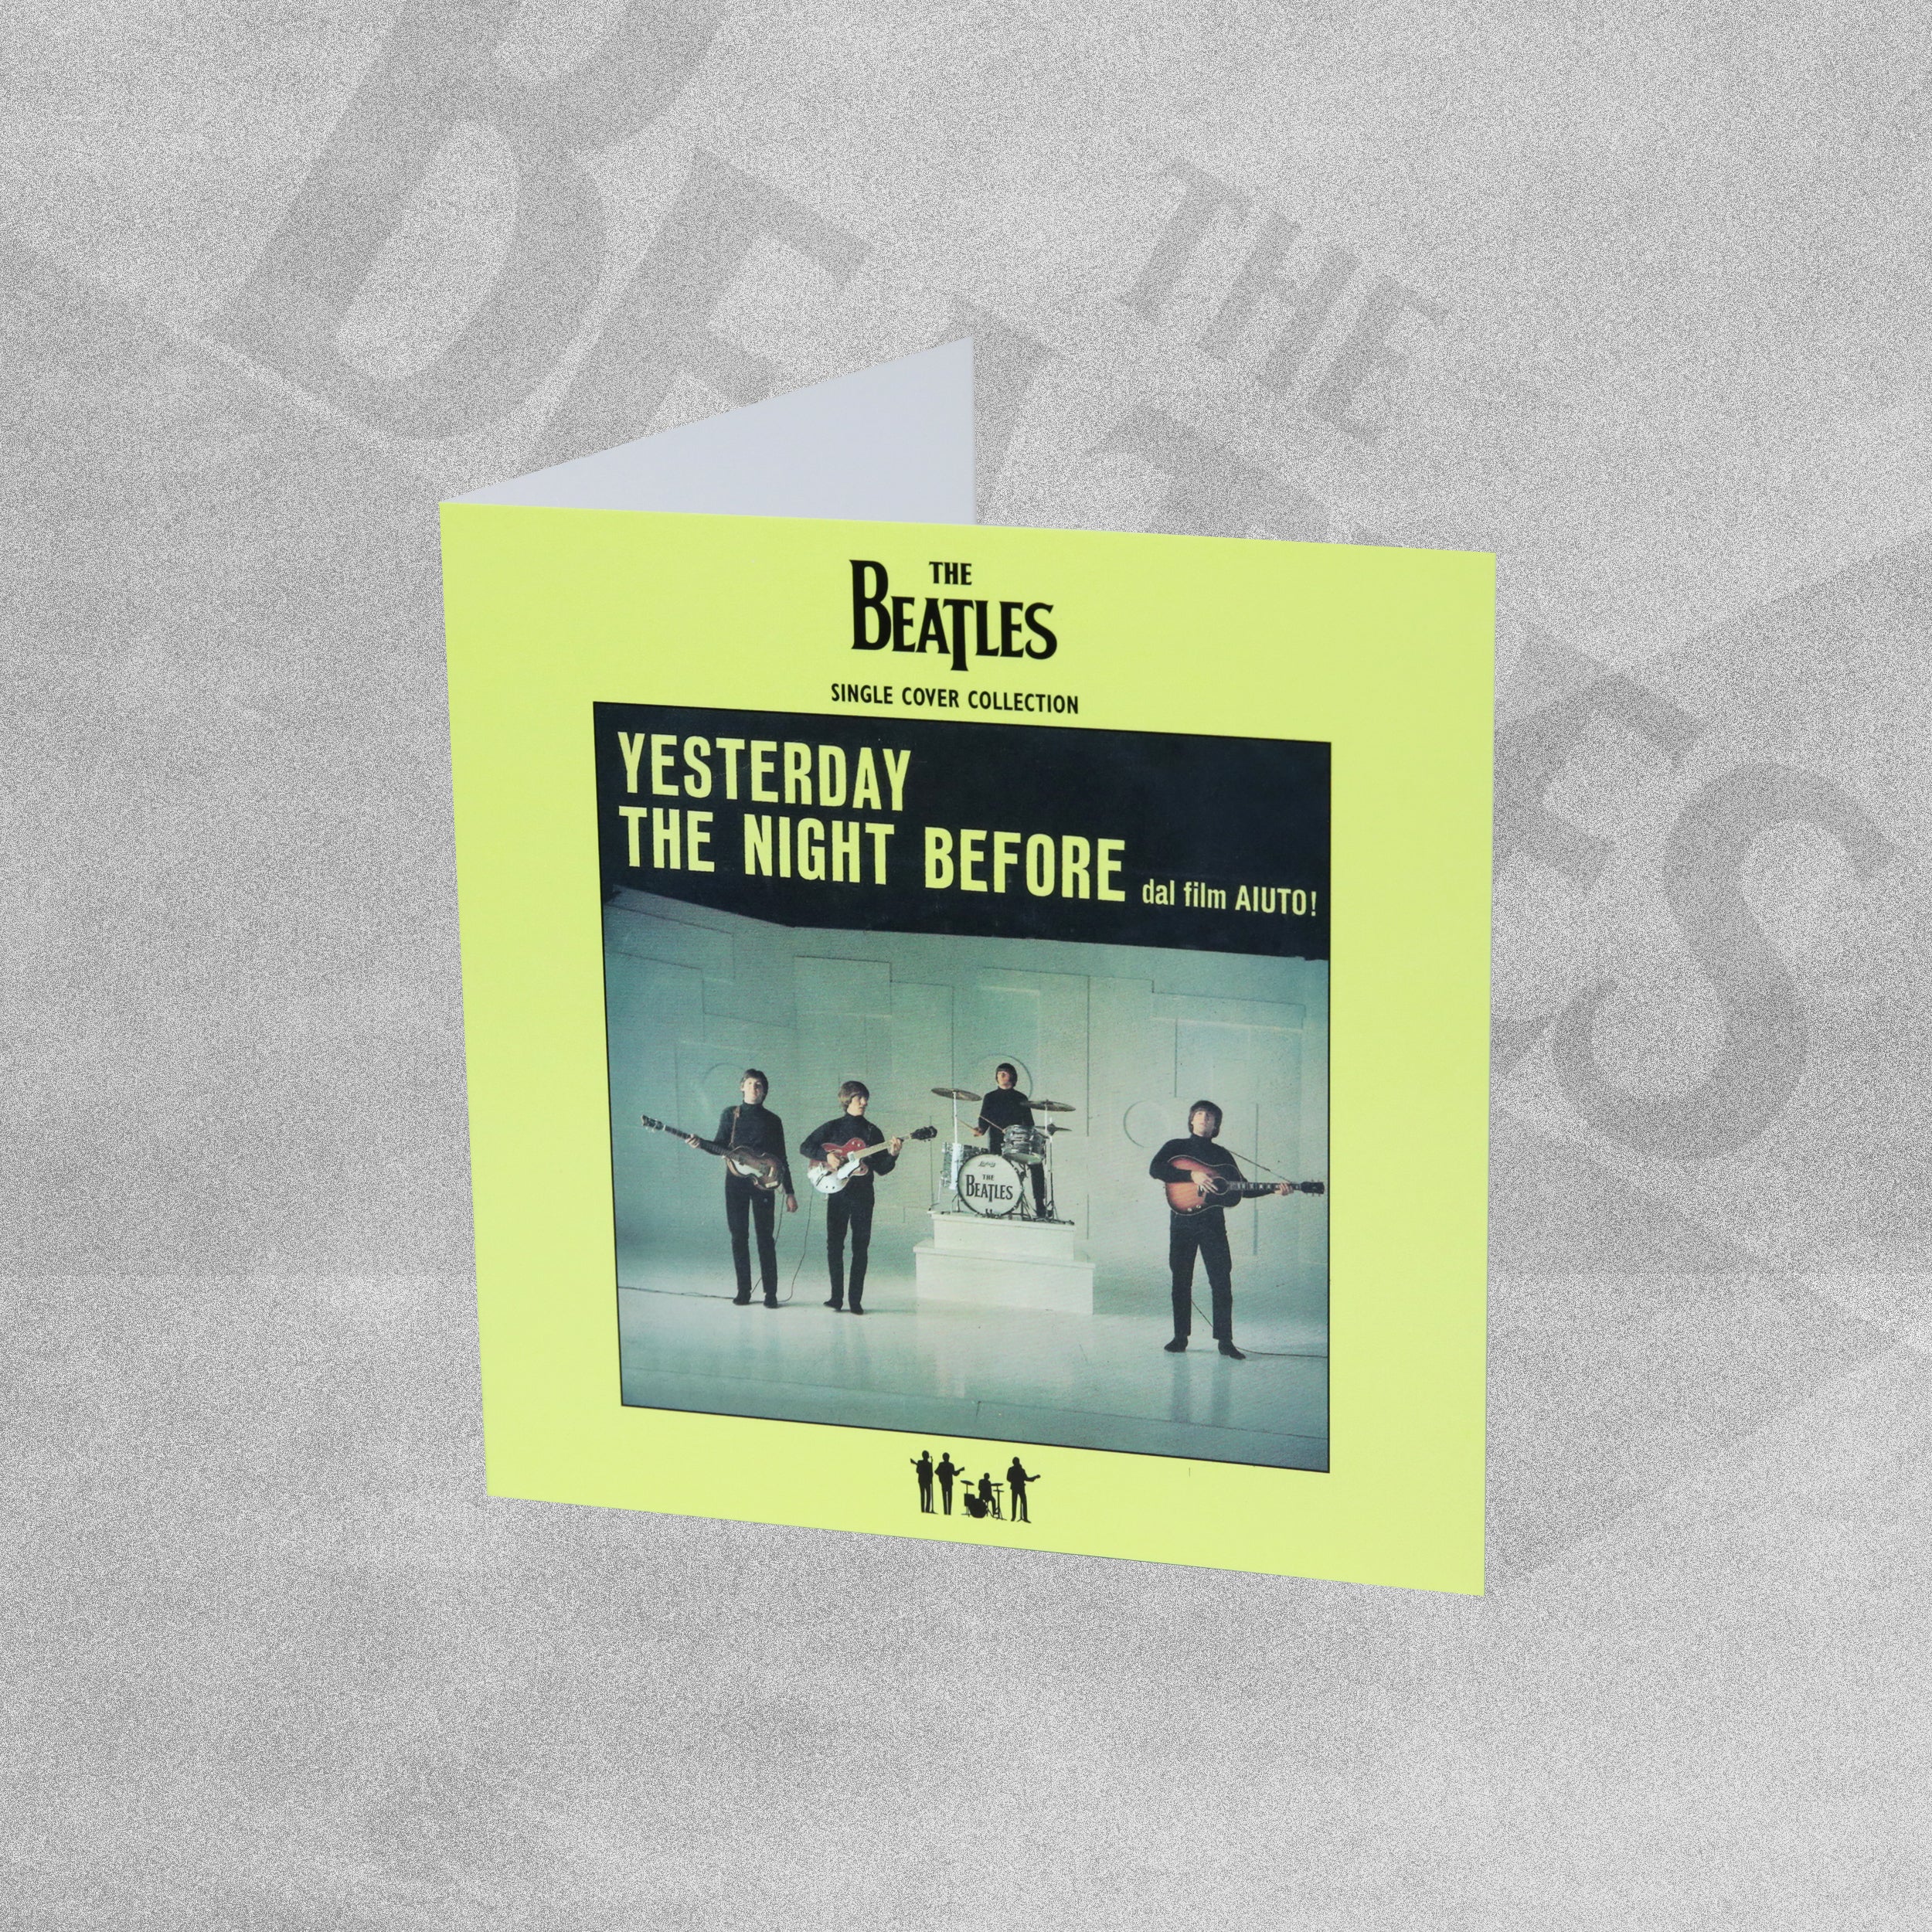 The Beatles Single Cover Collection Greeting Card - Yesterday